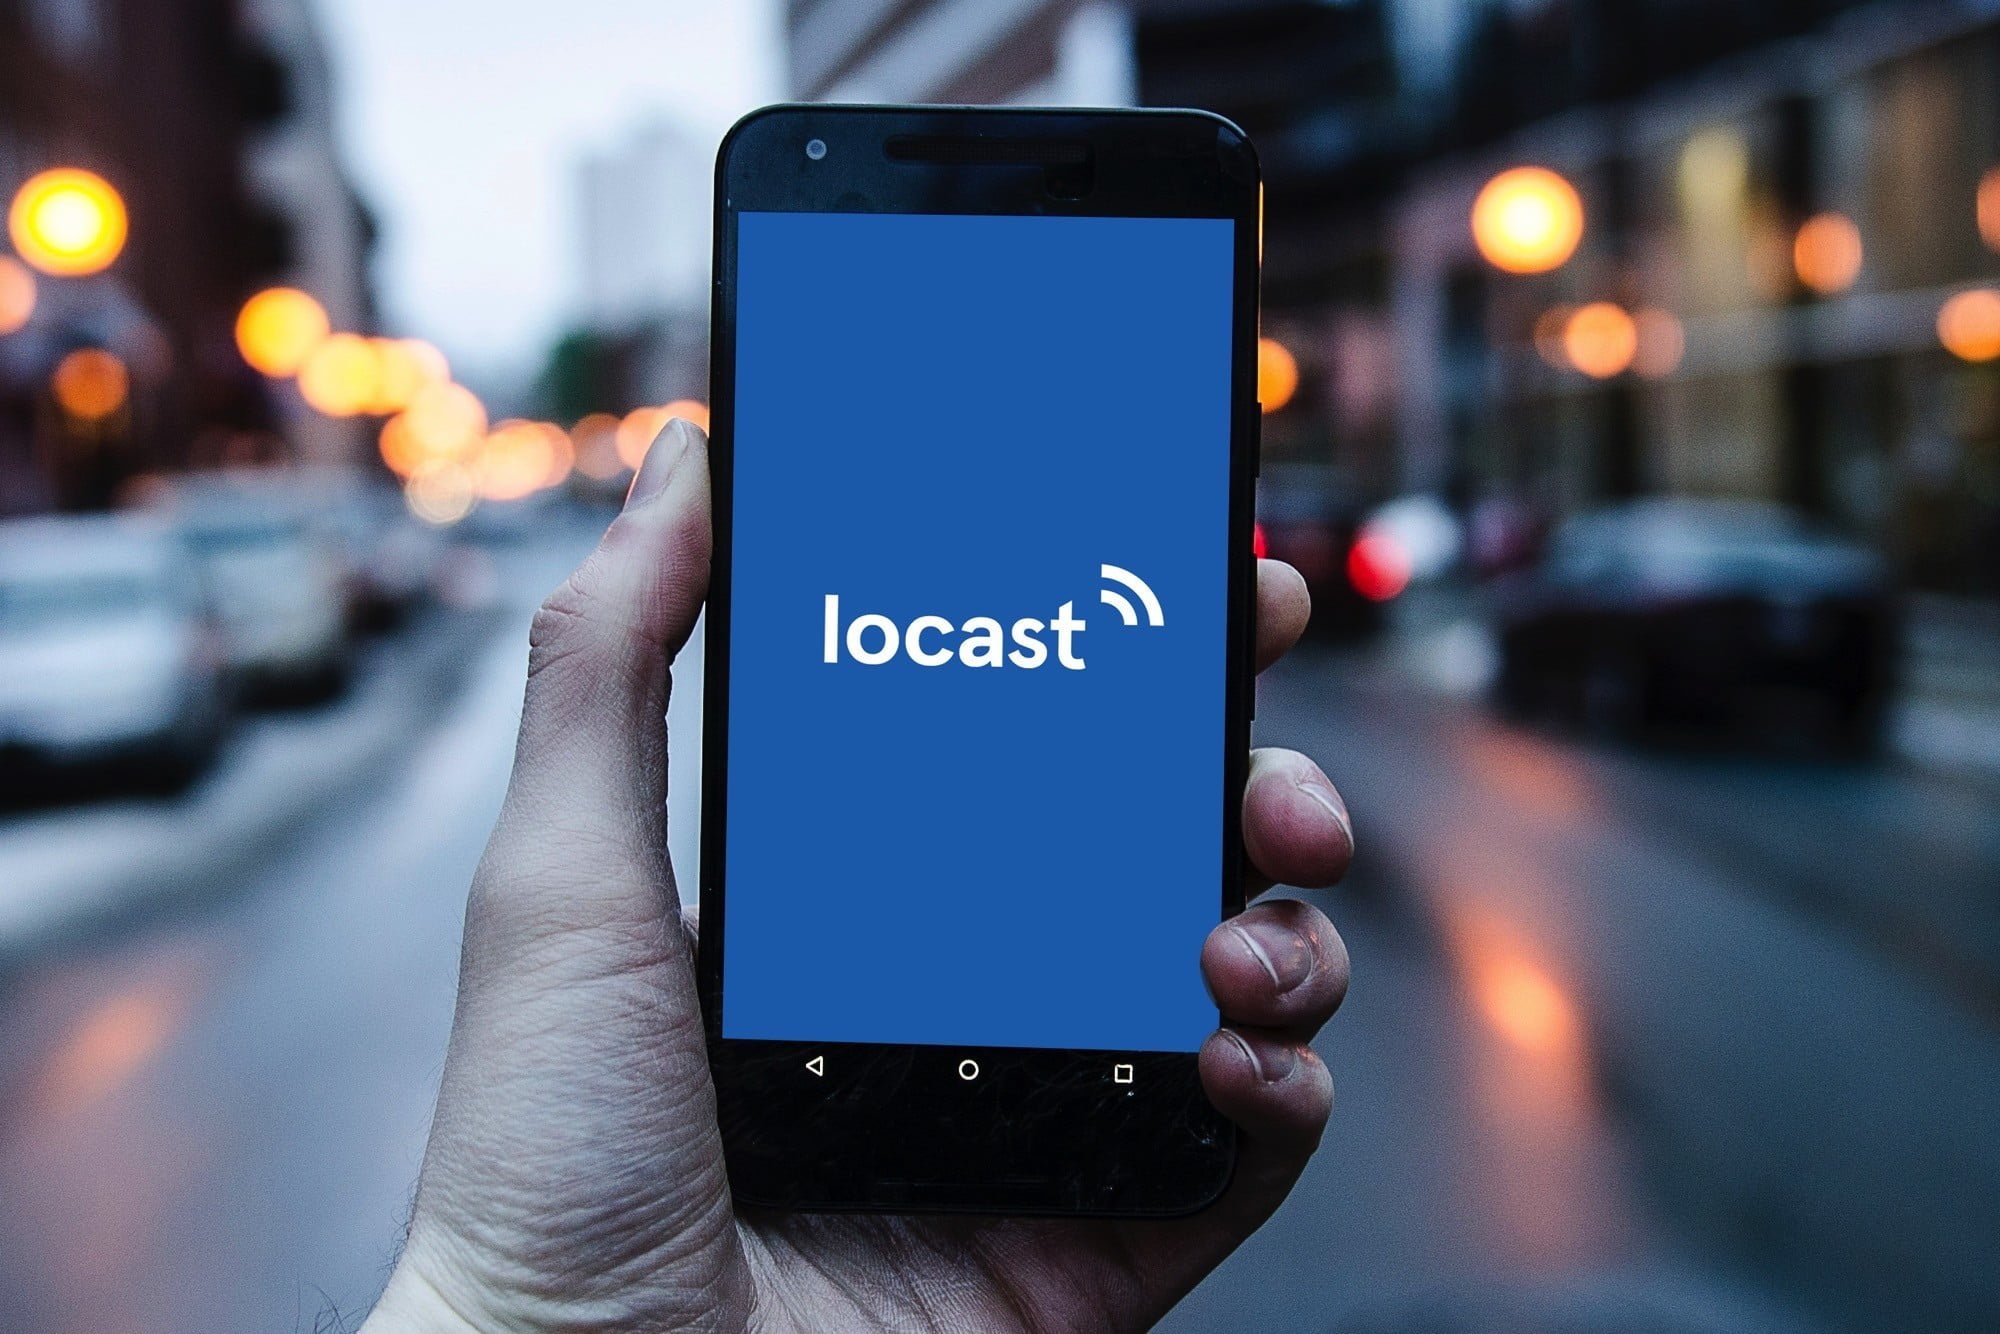 Why Did the Major TV Networks Force Locast's Streaming Service to Shut Down?